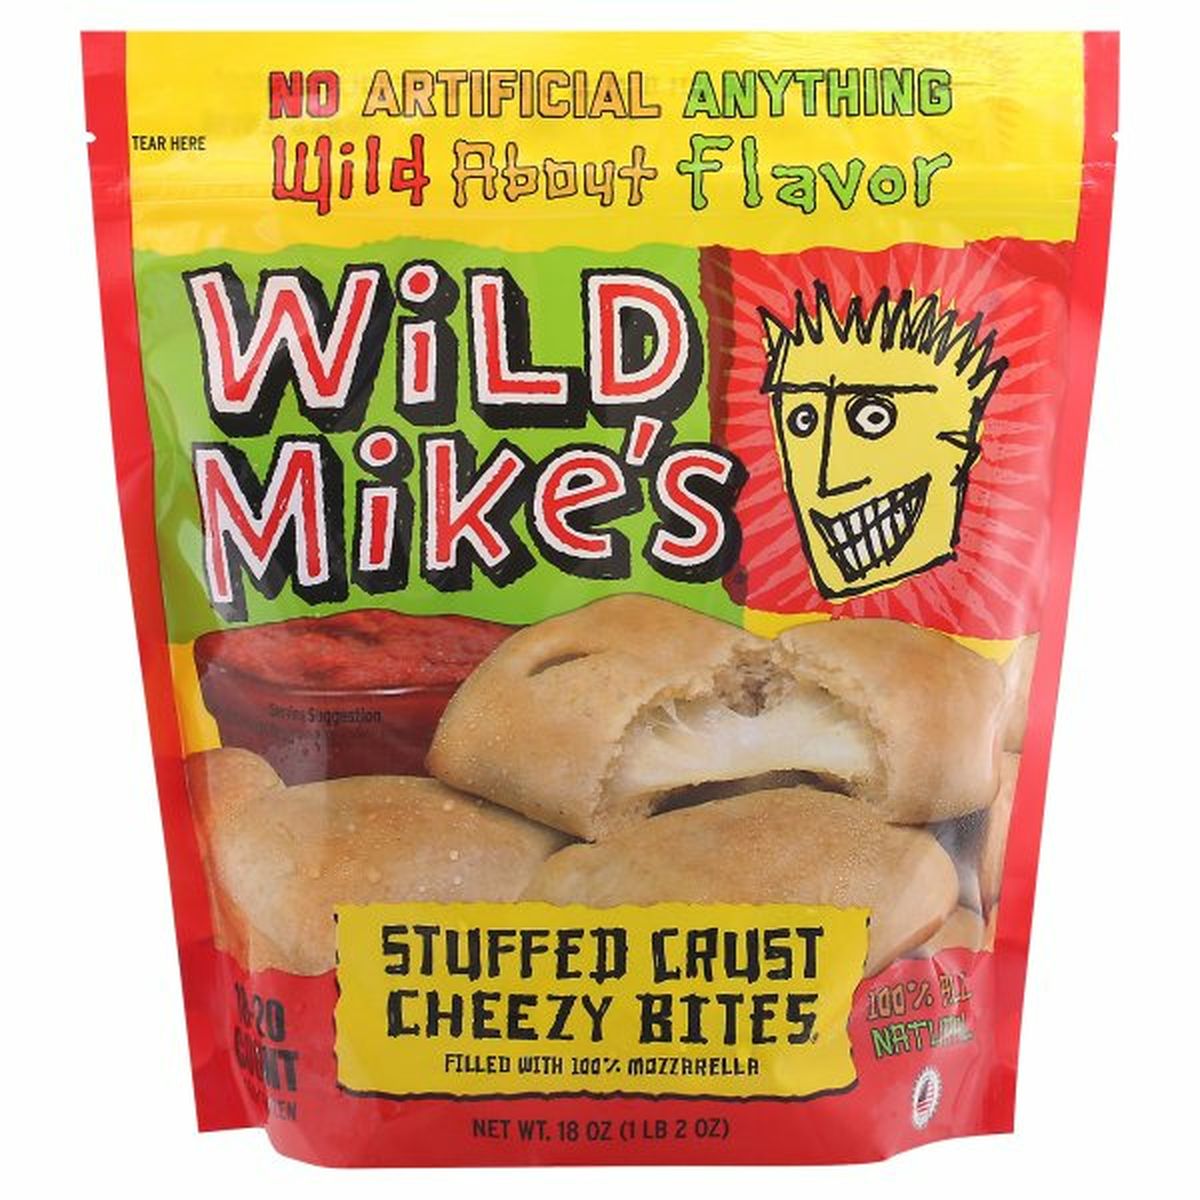 Calories in Wild Mikes Cheezy Bites, Stuffed Crust